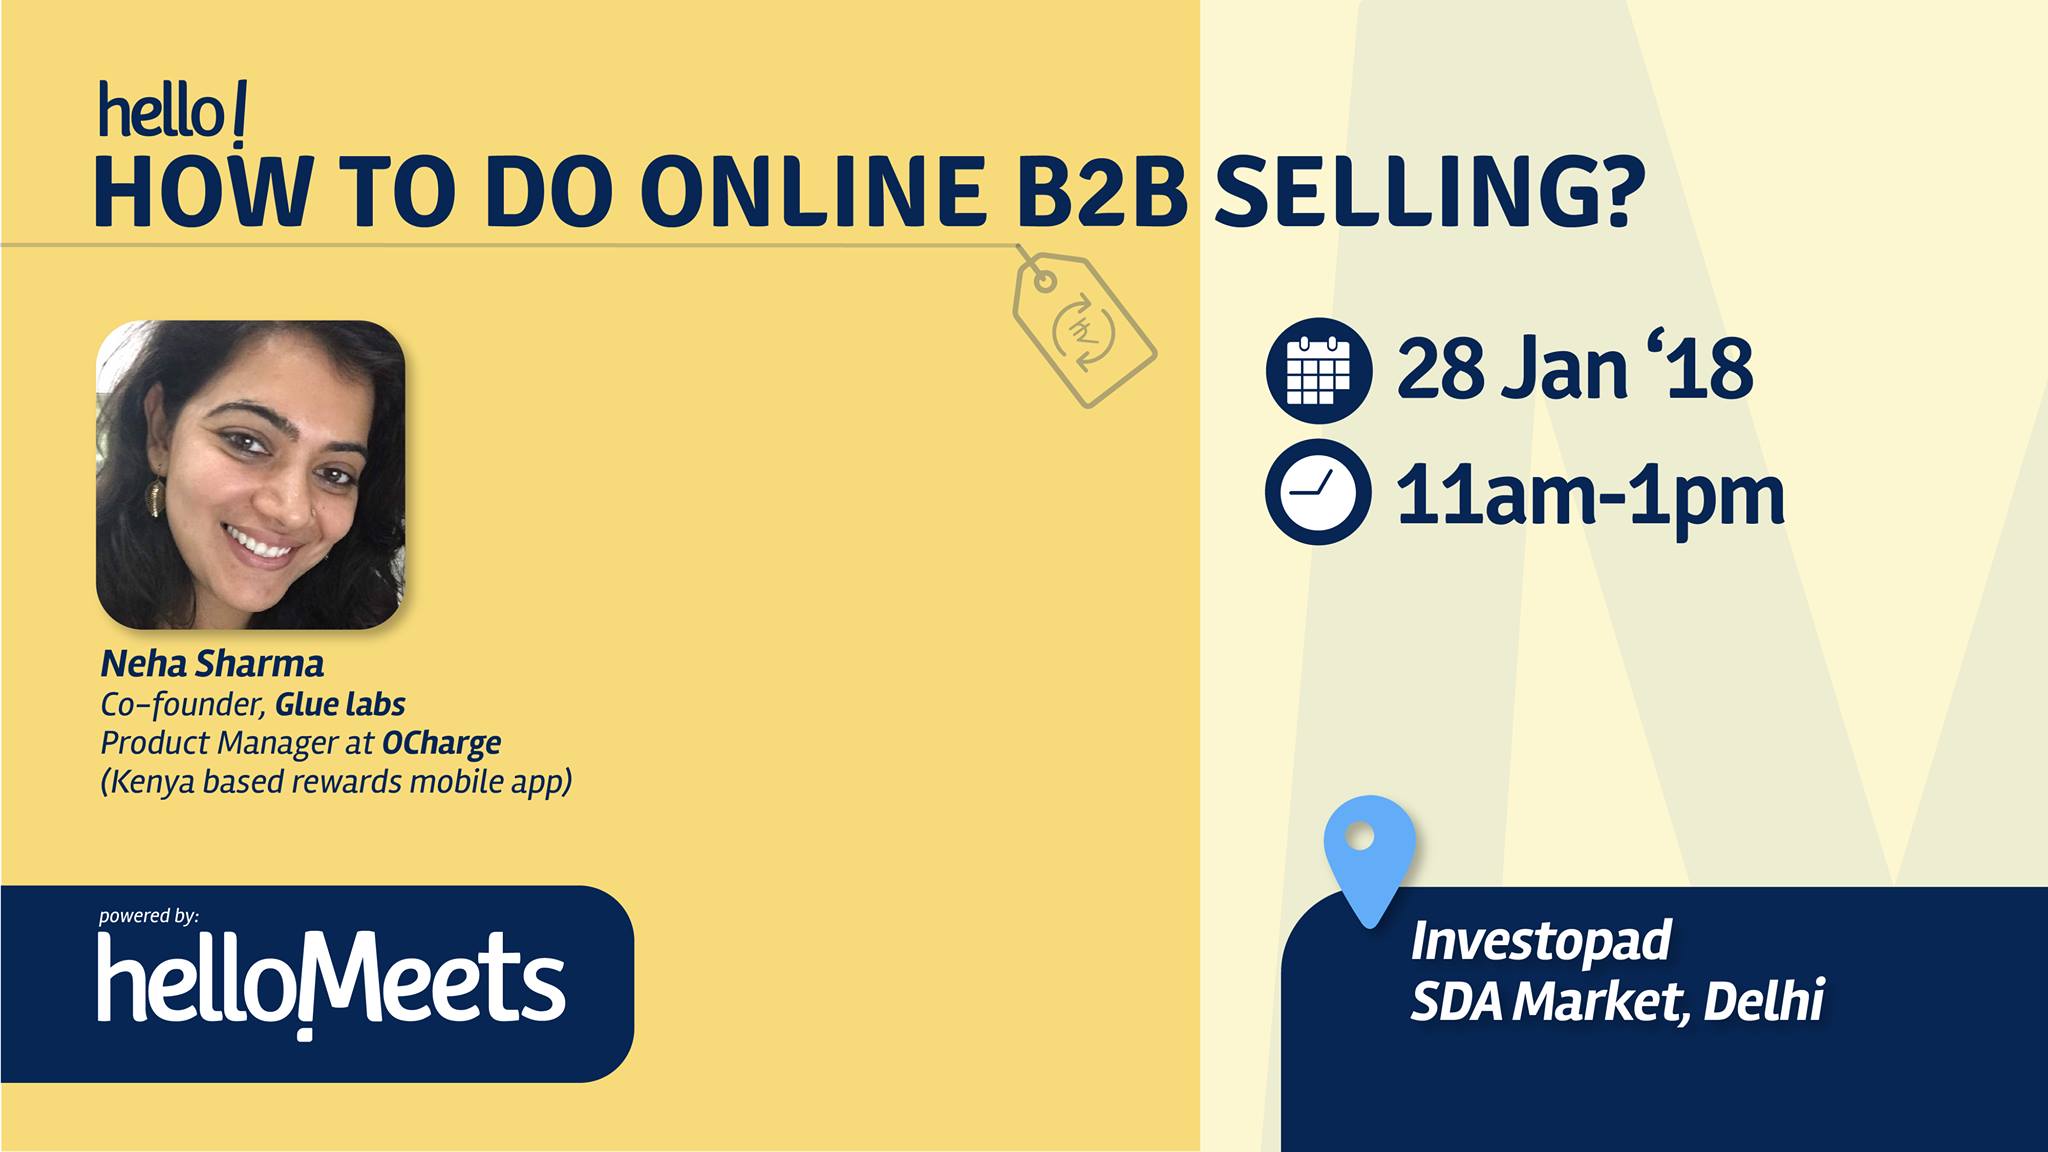 HOW TO DO ONLINE B2B SELLING?